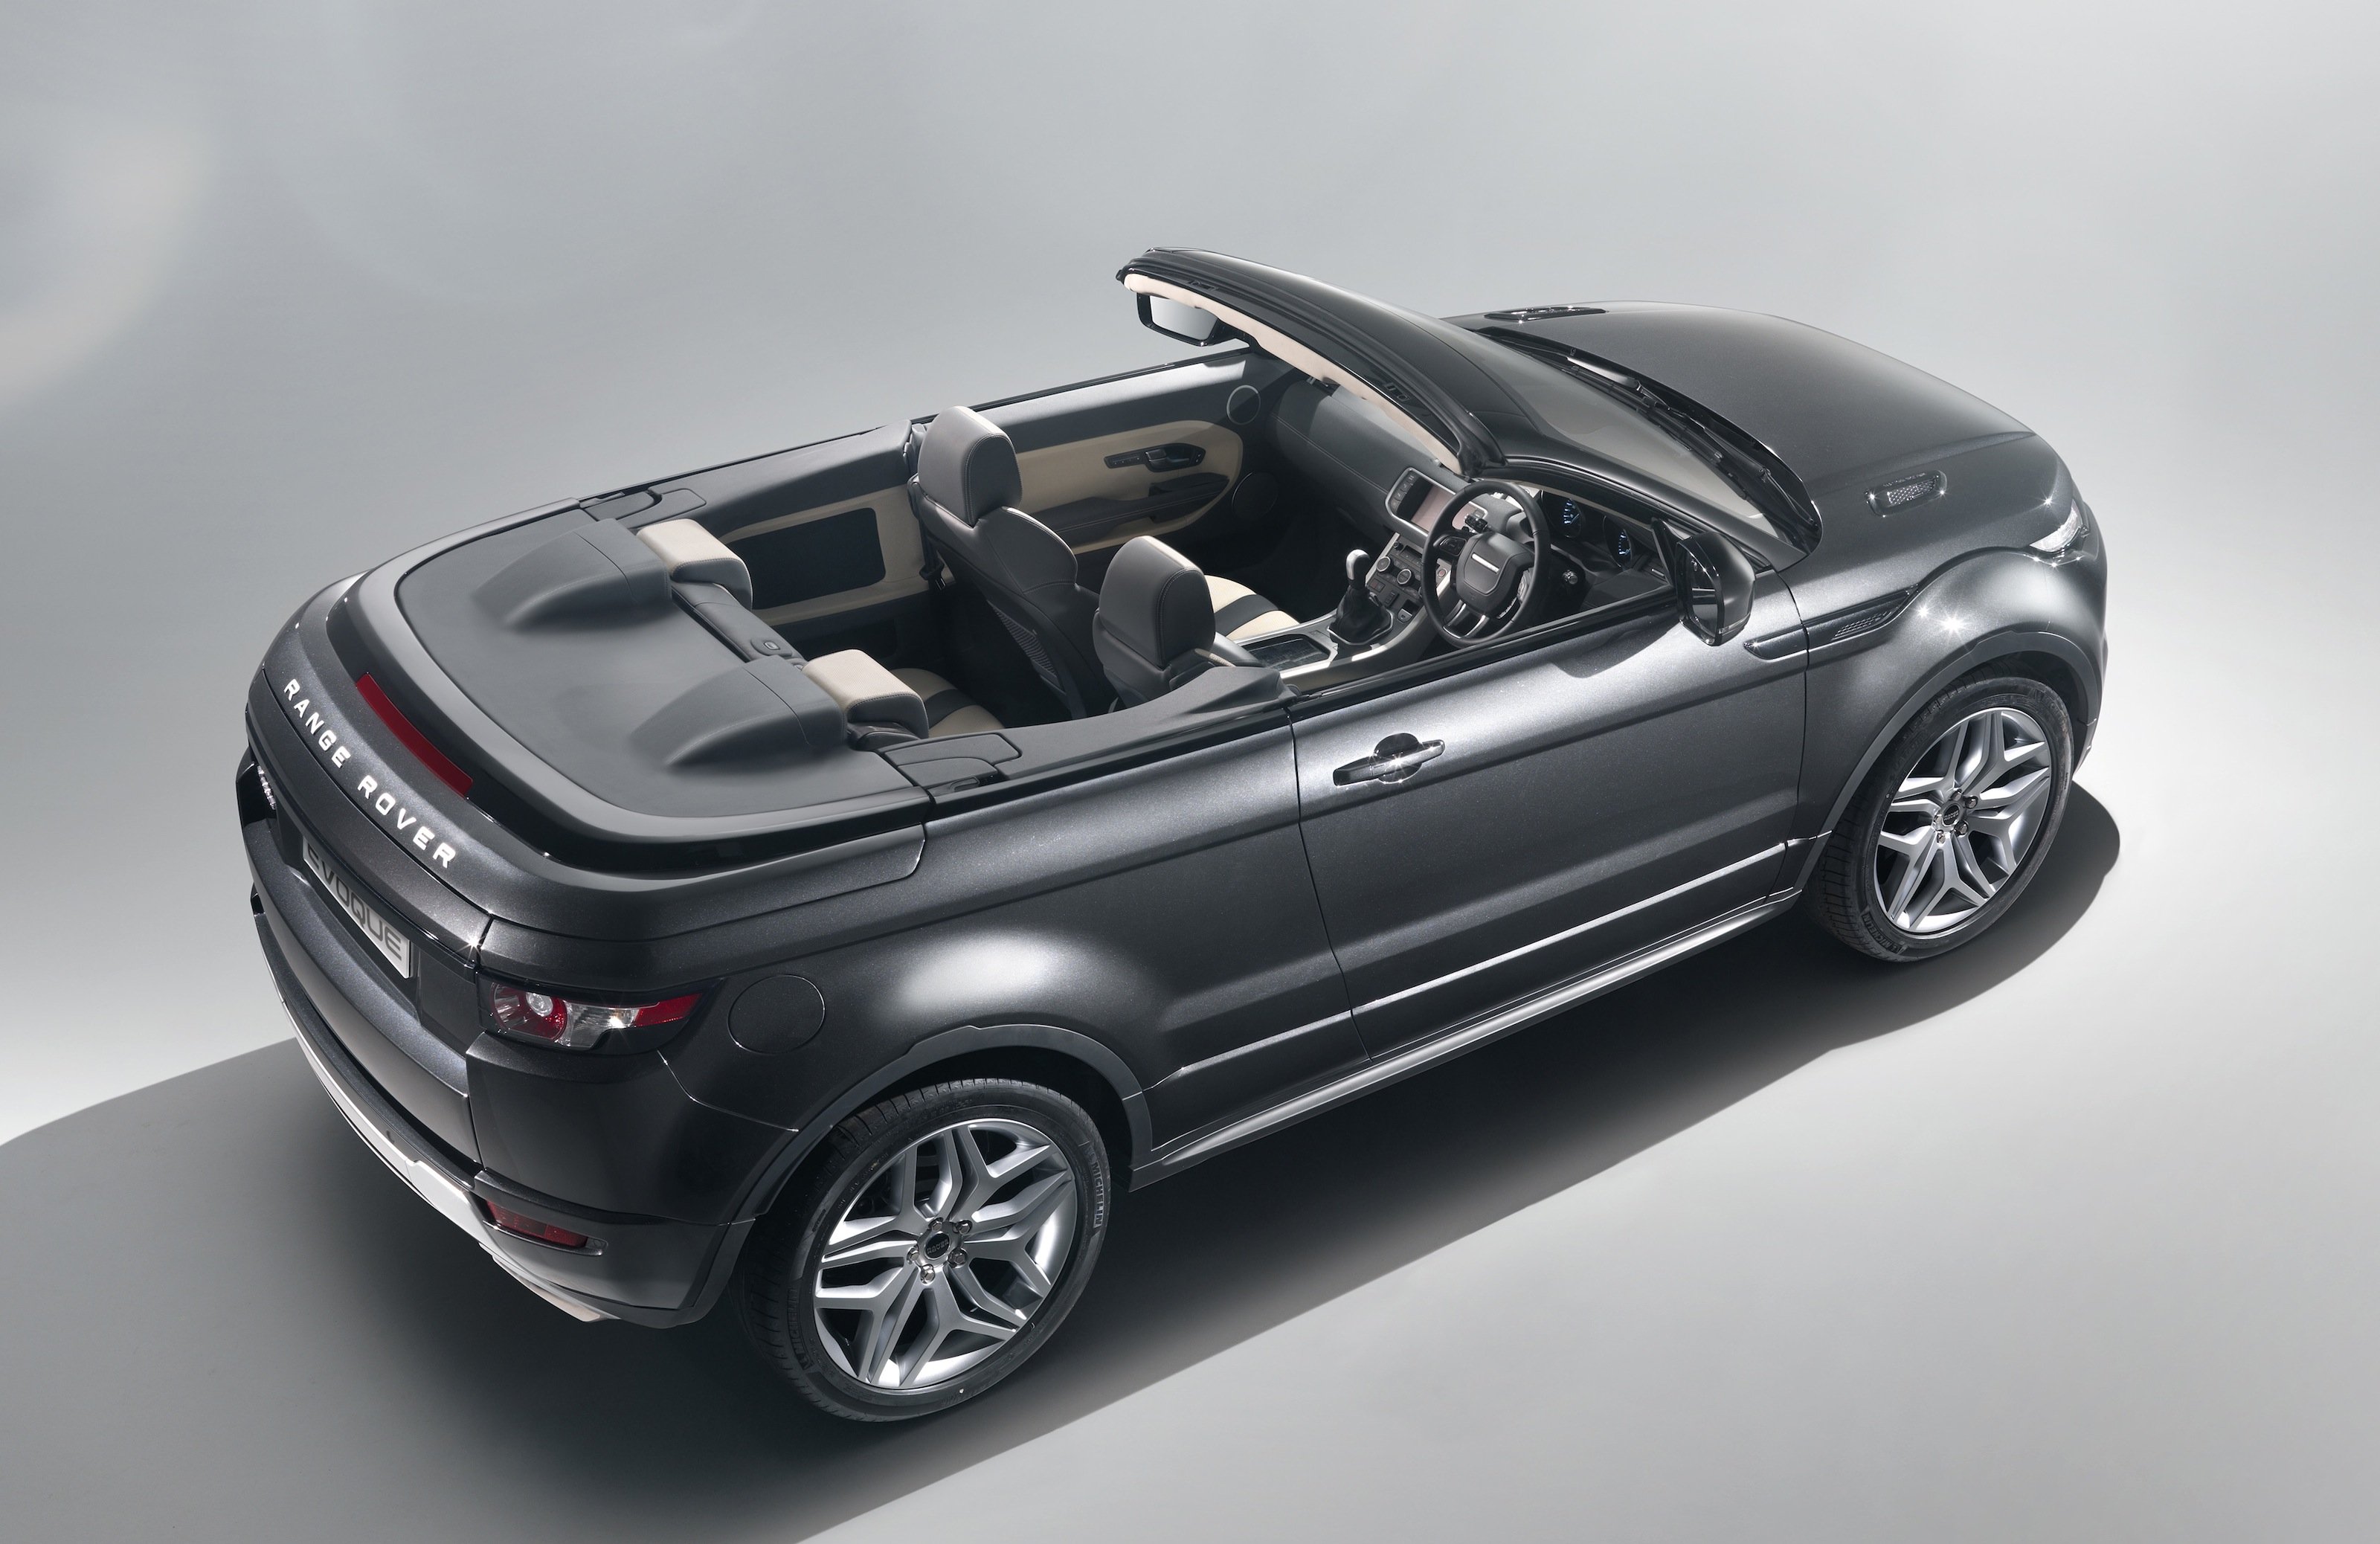 Land Rover Range Rover Evoque Convertible accessories specifications